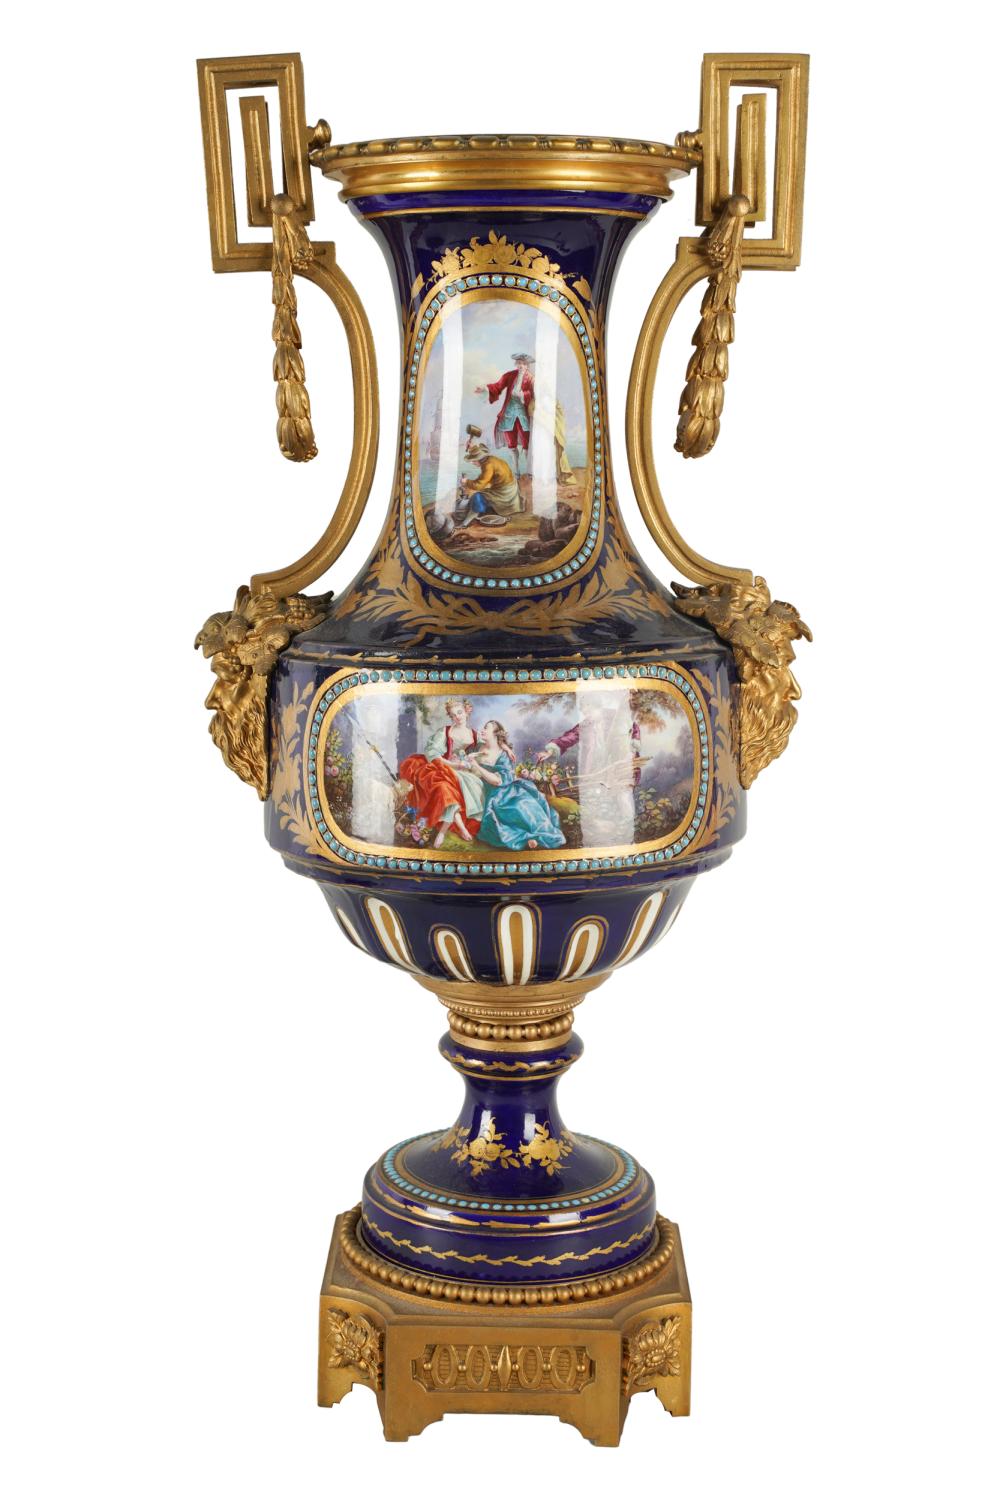 SEVRES-STYLE GILT BRONZE-MOUNTED